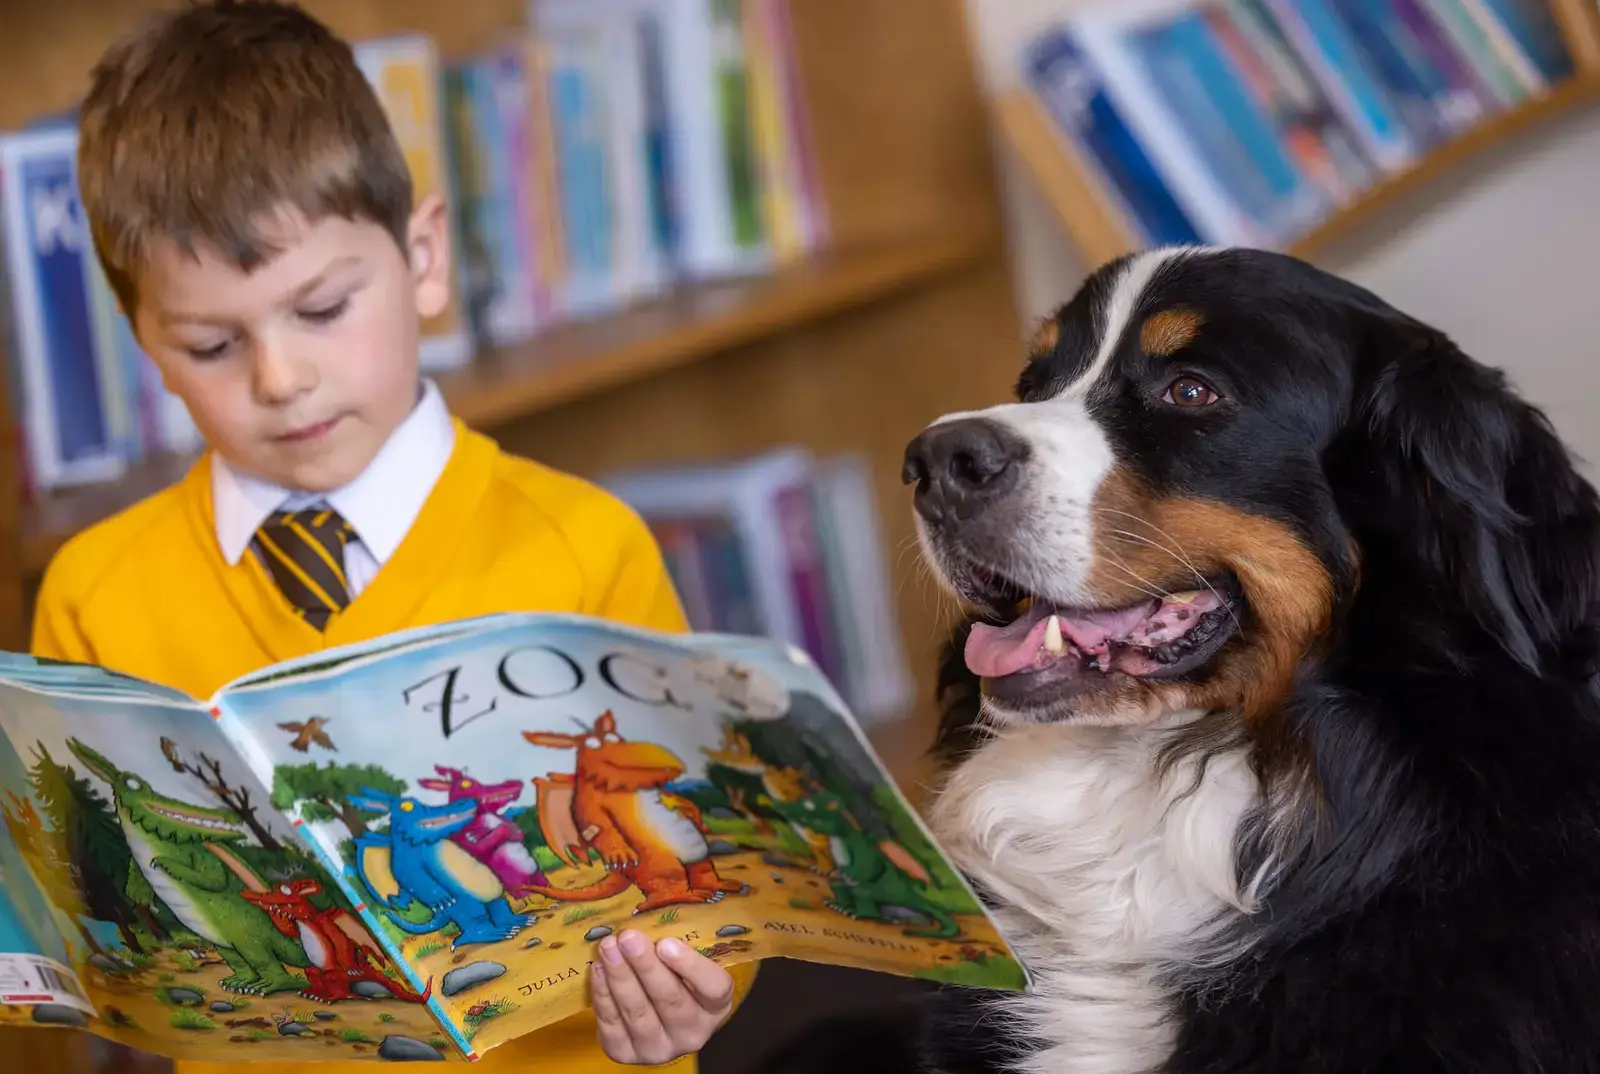 Chapter House pupil reading to Indy, Queen Ethelburga's reading dog